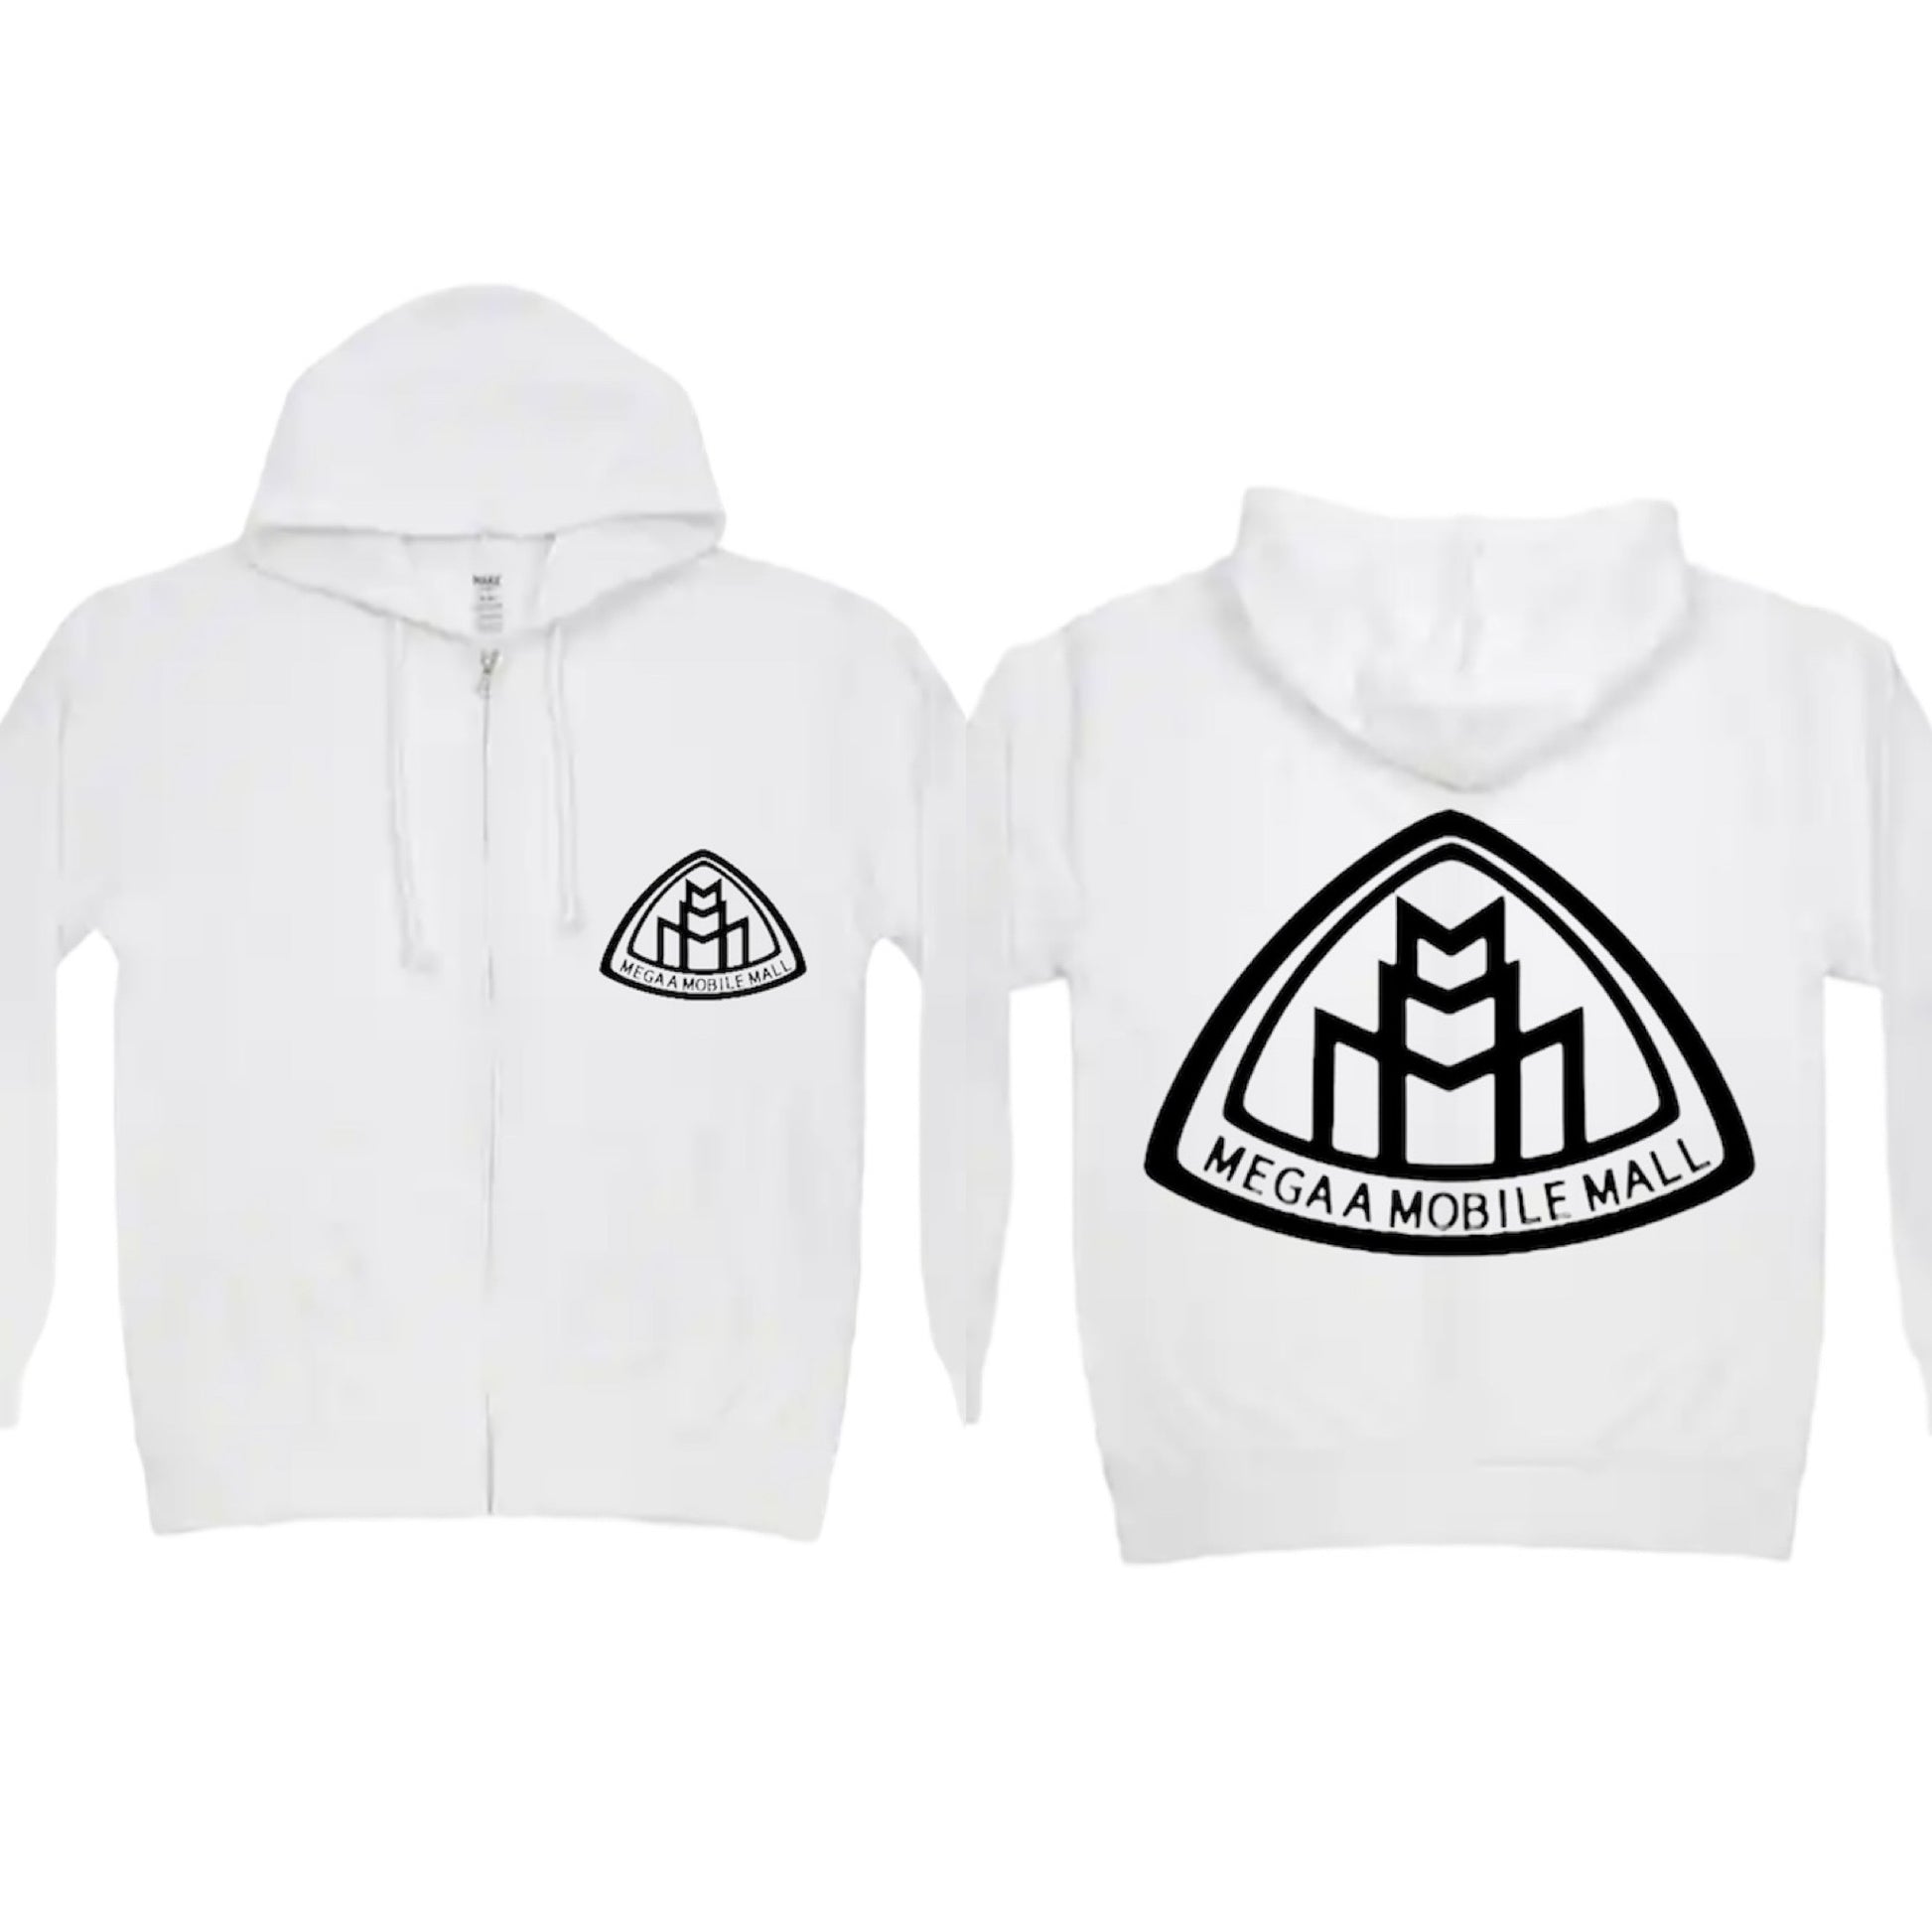 megaamobilemall white zip up hoodie with black logo